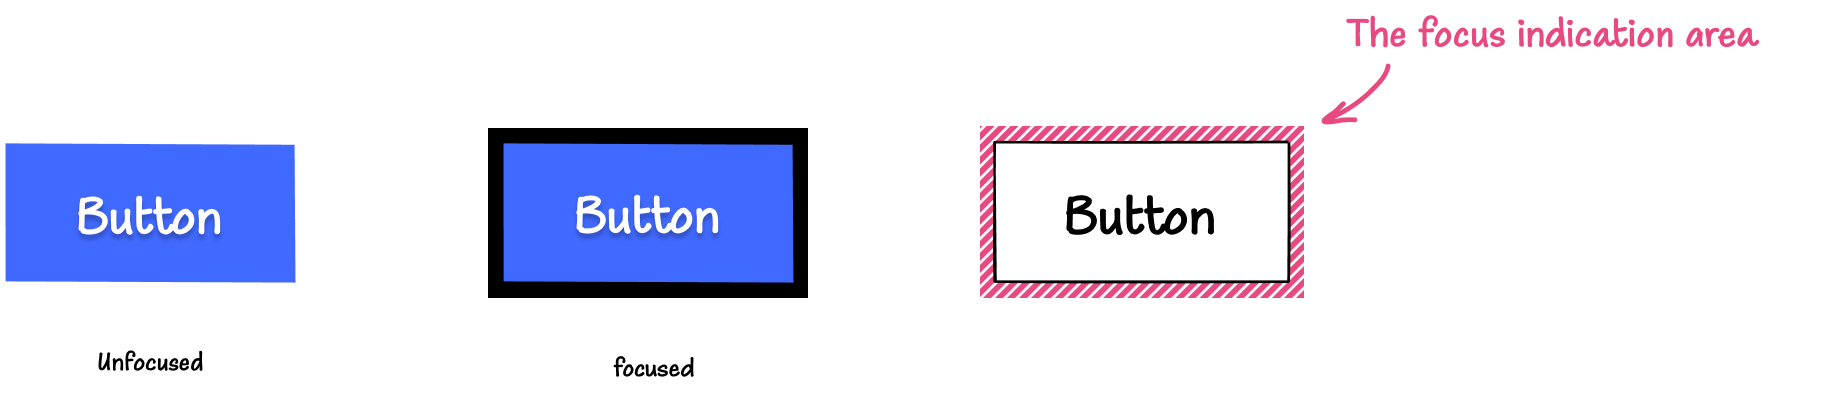 Illustration: On the left is a blue button with a white label in its default, unfocused state. In the middle is the blue button with a thick black outline around it. On the right, is a button with the same outline but with a pattern applied to it, indicating that this patterned area is the focus indication area.